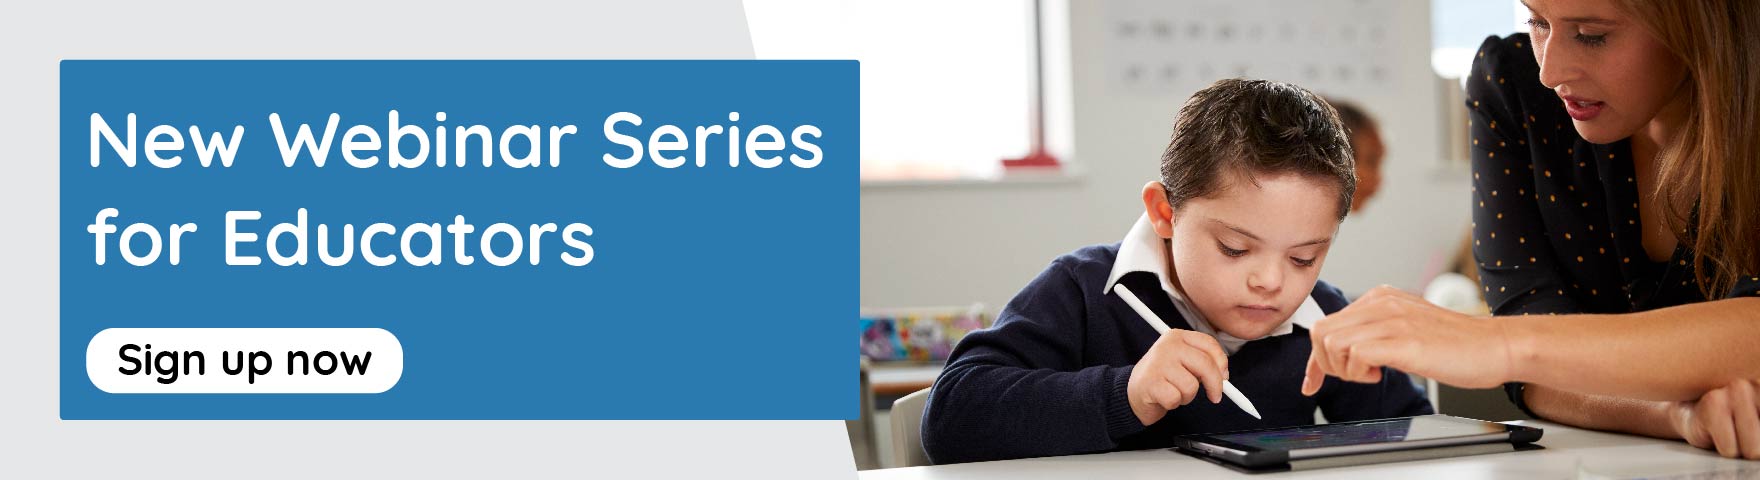 Accessible Reading Webinar Series - Register Now - Image of student and teacher in class